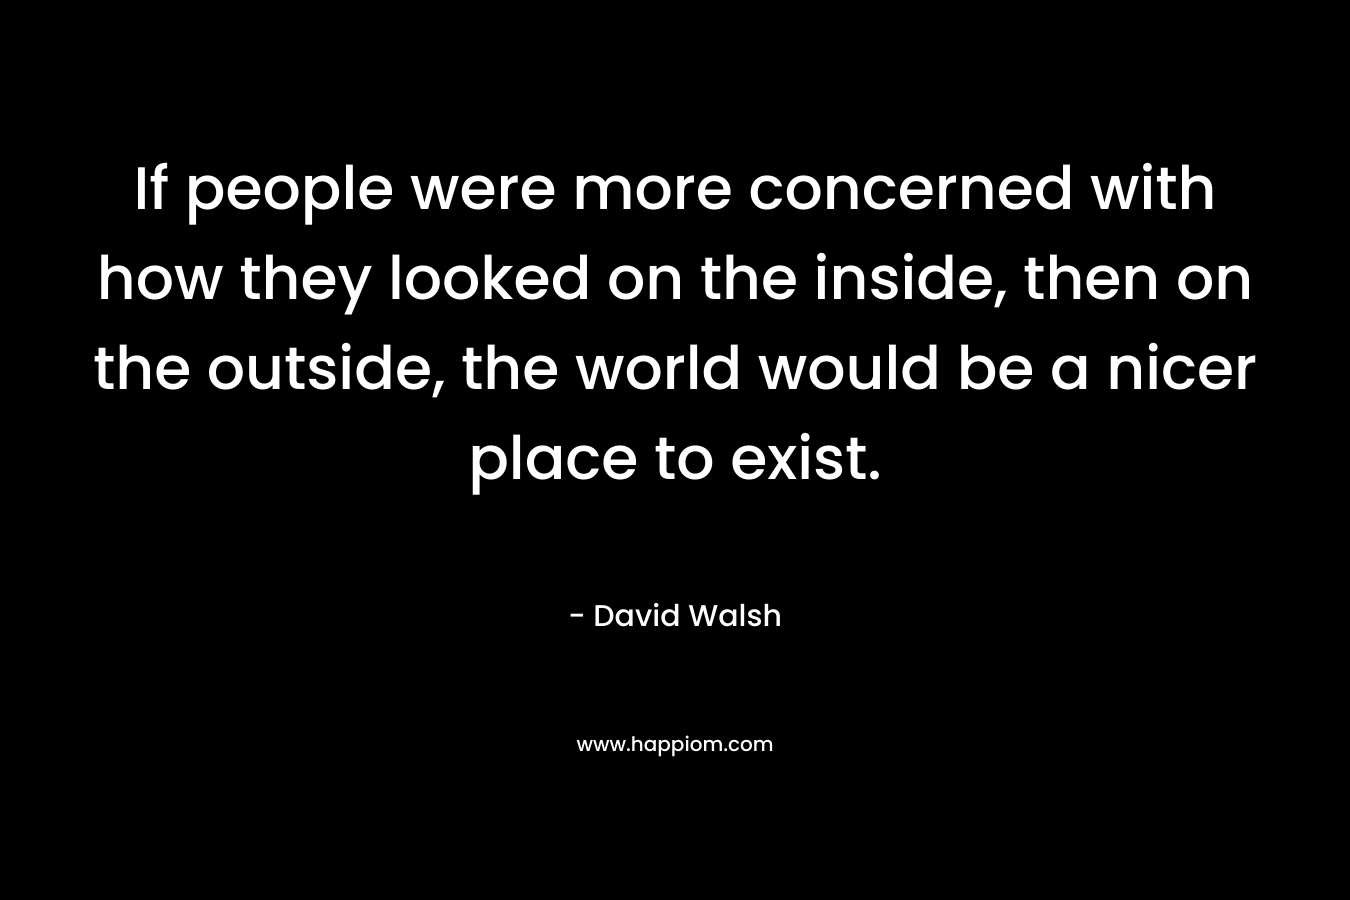 If people were more concerned with how they looked on the inside, then on the outside, the world would be a nicer place to exist. – David Walsh